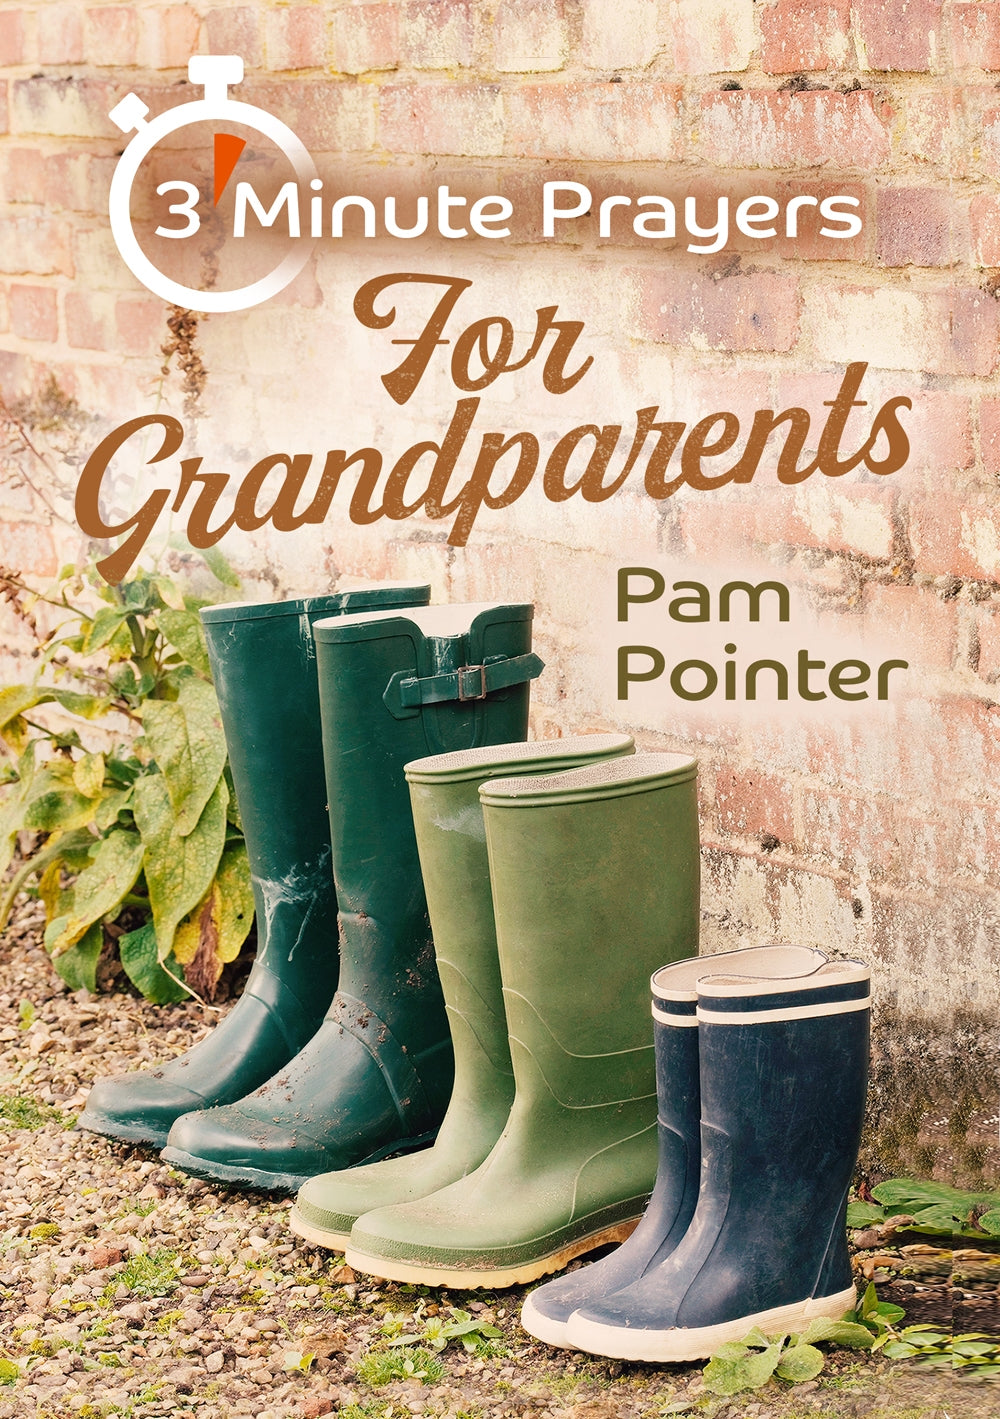 3 Minute Prayers For Grandparents3 Minute Prayers For Grandparents